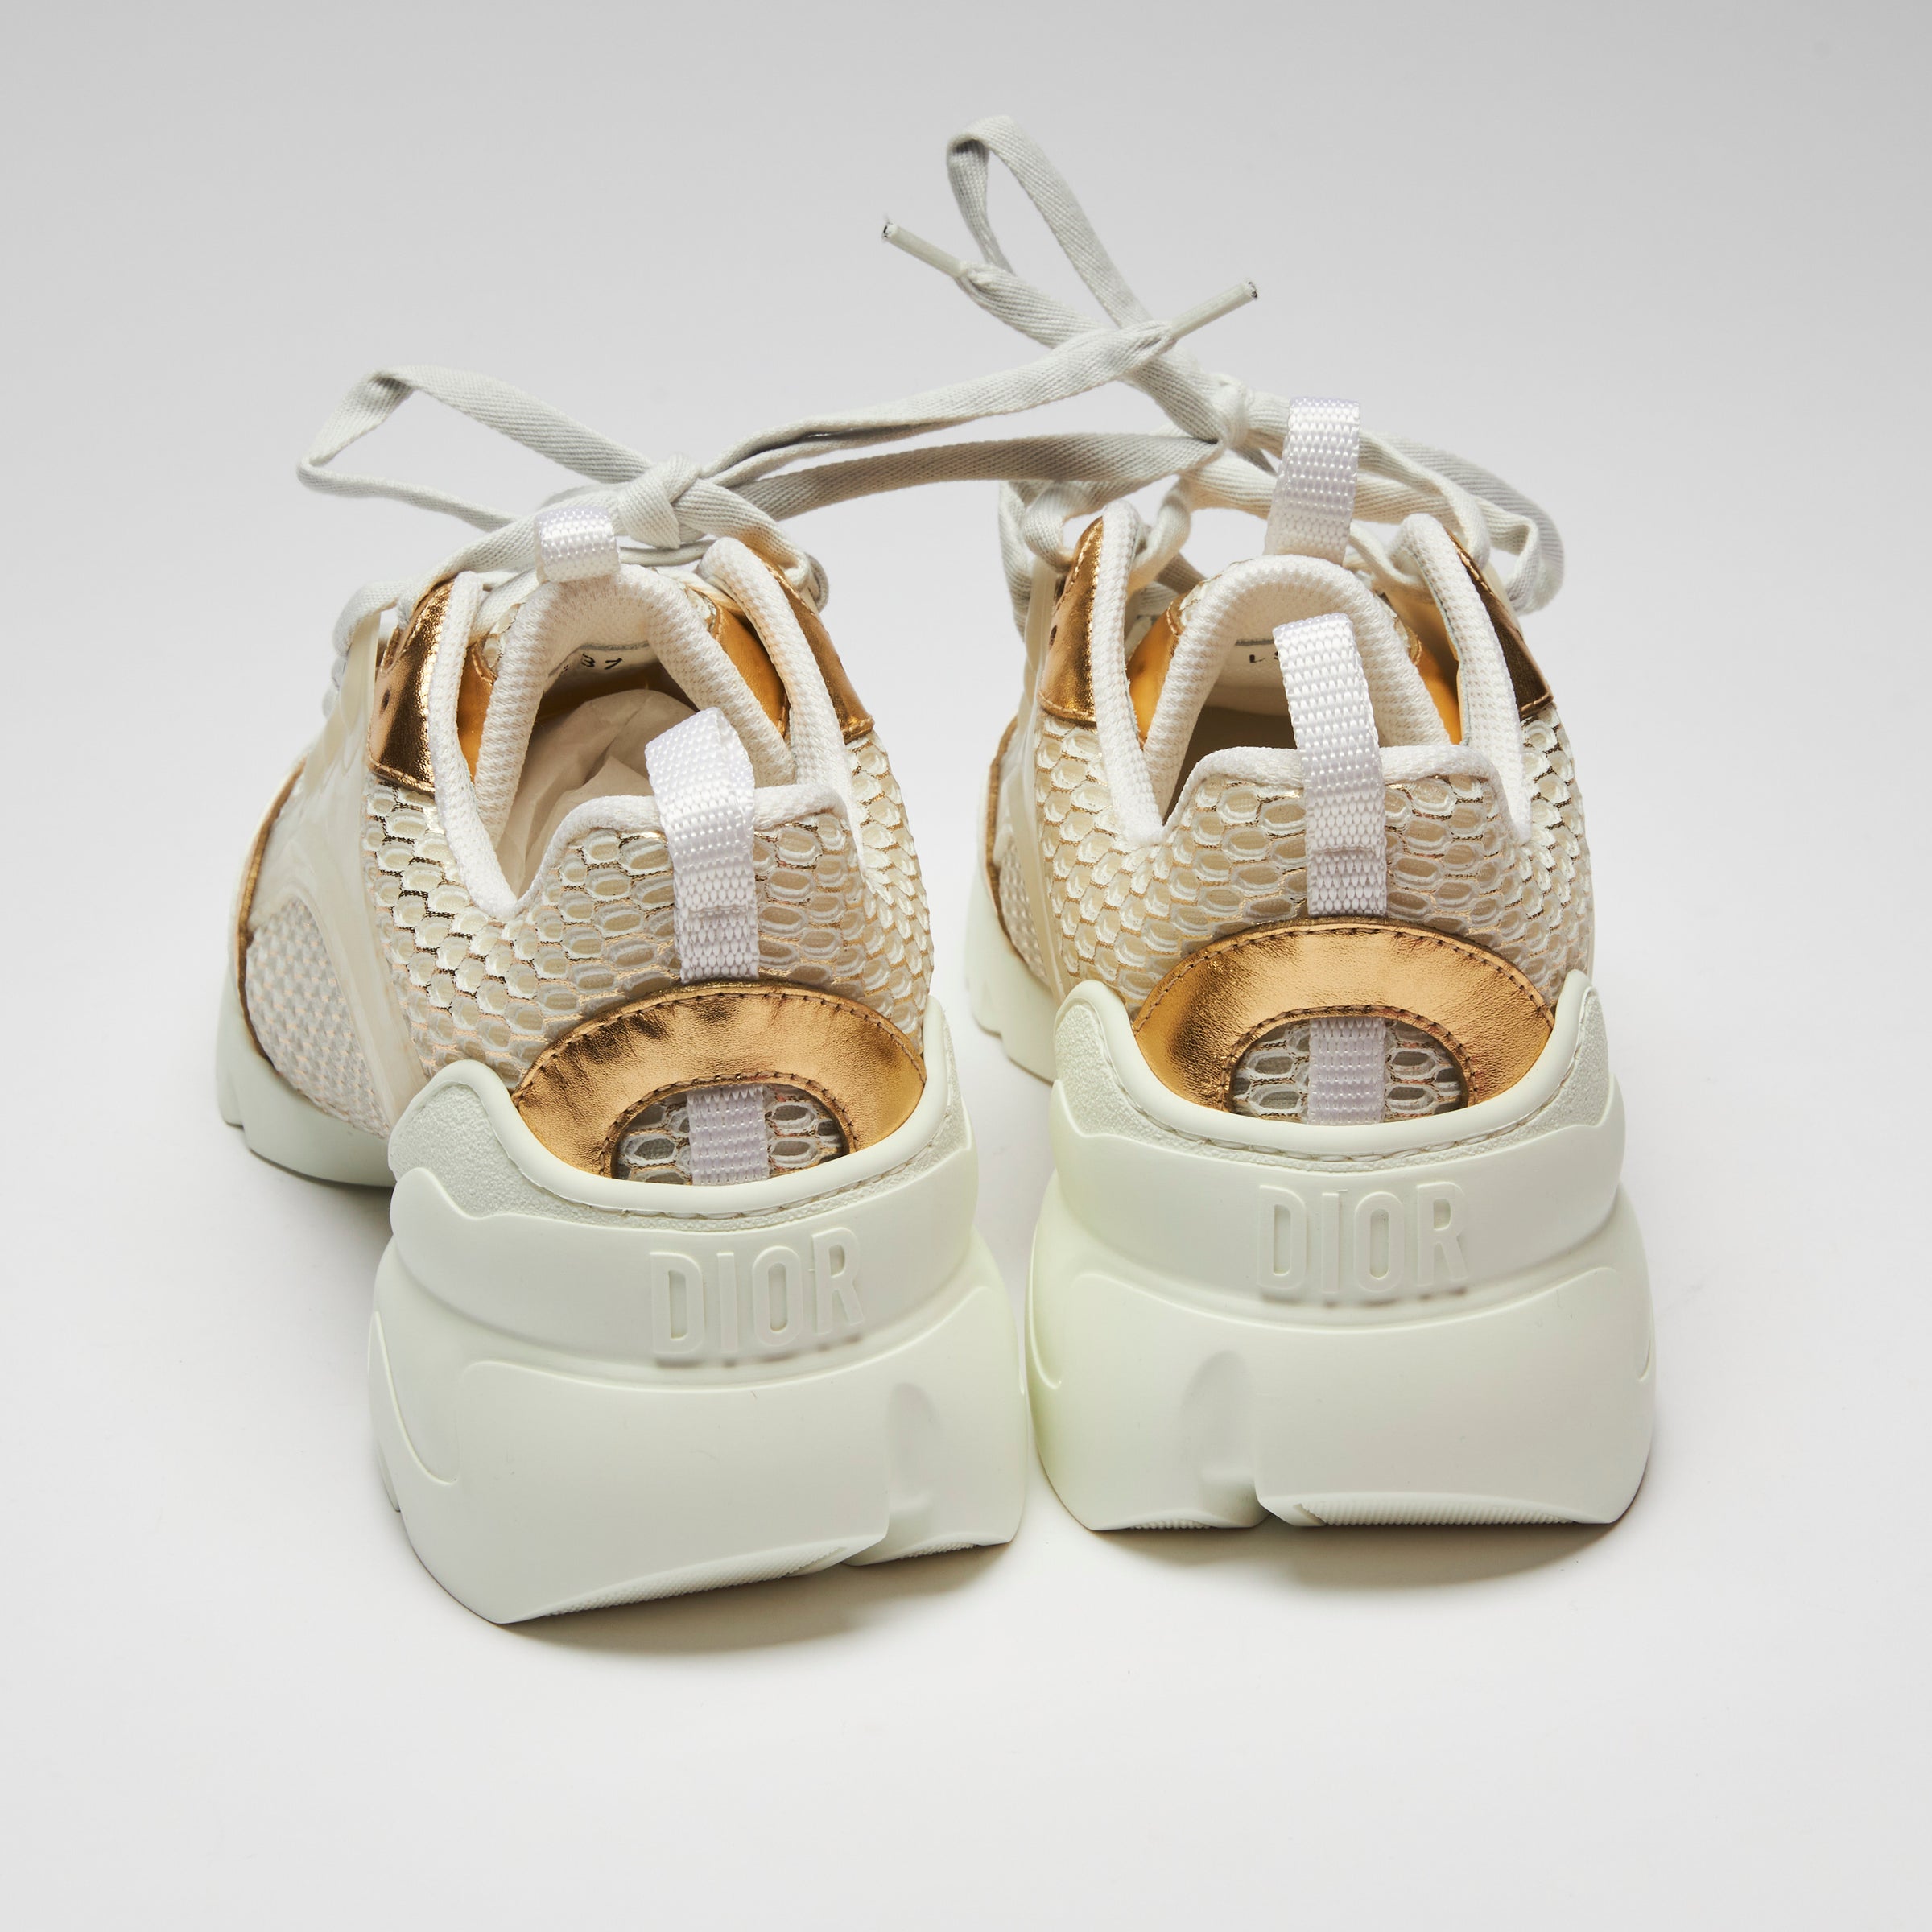 Dior Vibe Sneakers | Luxury Finds Consignment